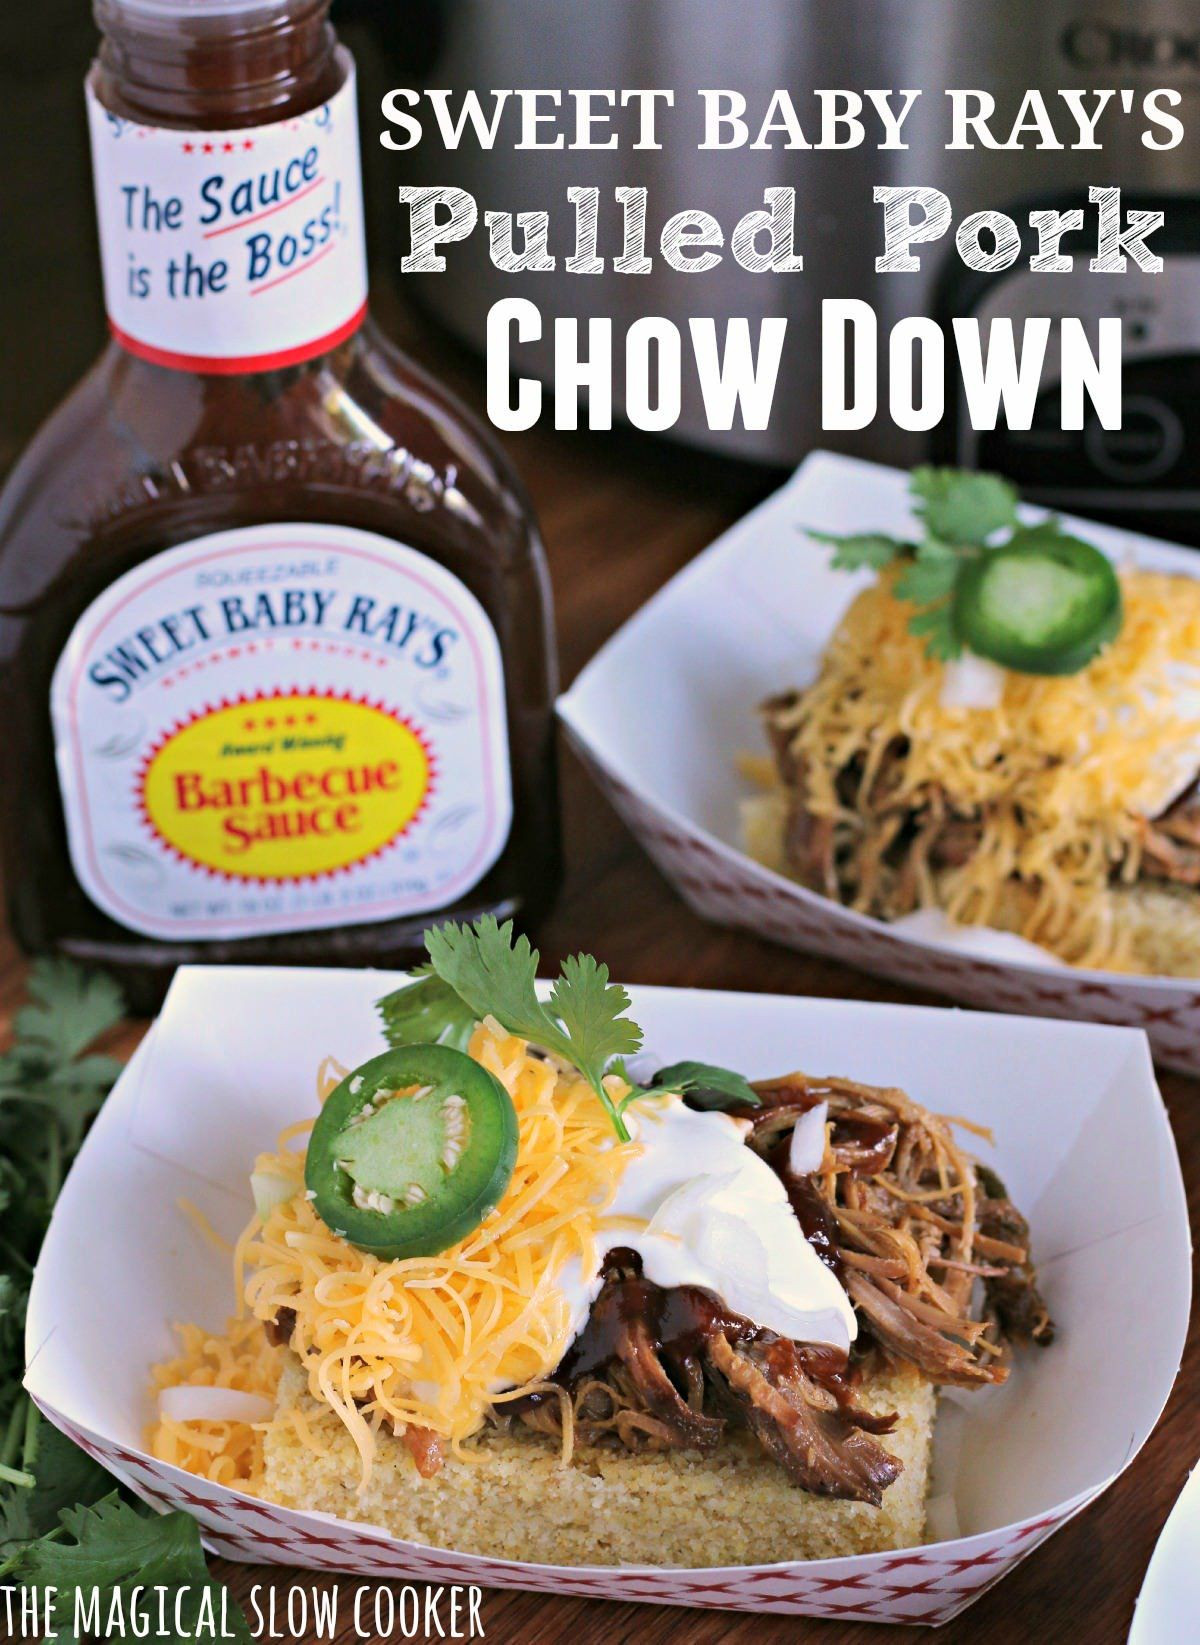 Sweet Baby Ray'S Bbq Pork Chops In Oven
 Sweet Baby Ray’s Pulled Pork Chow Down Recipe